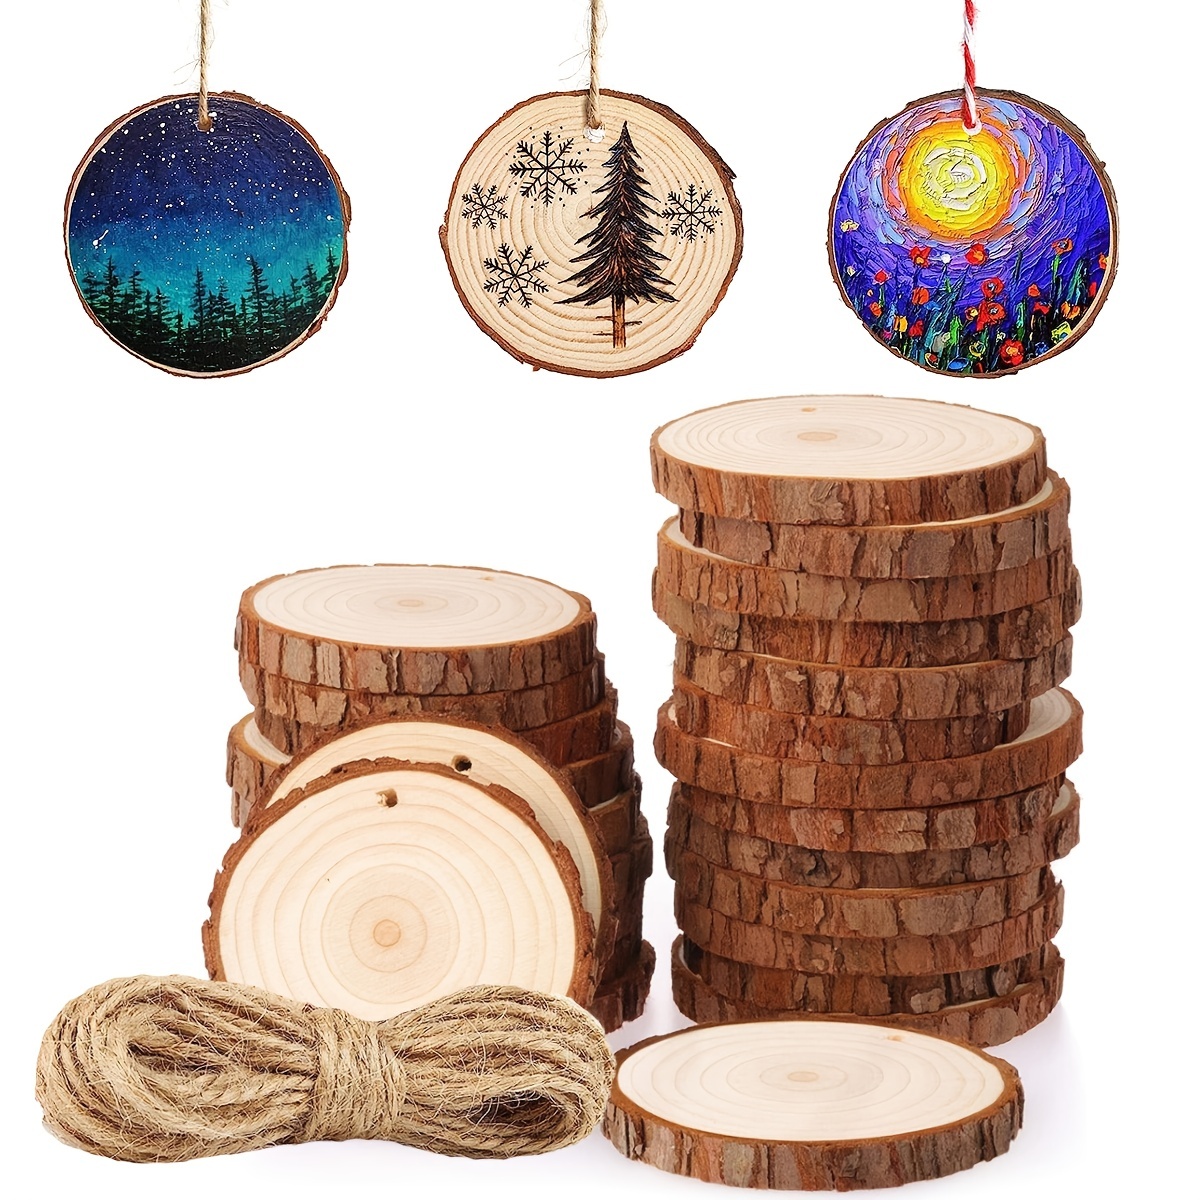 Abaodam 5pcs Round Log Discs Wooden Rounds for Crafts Natural Wood Circle  Slices with Bark Mini Tree Slices Wooden Ornaments Small Wood Slice Rustic